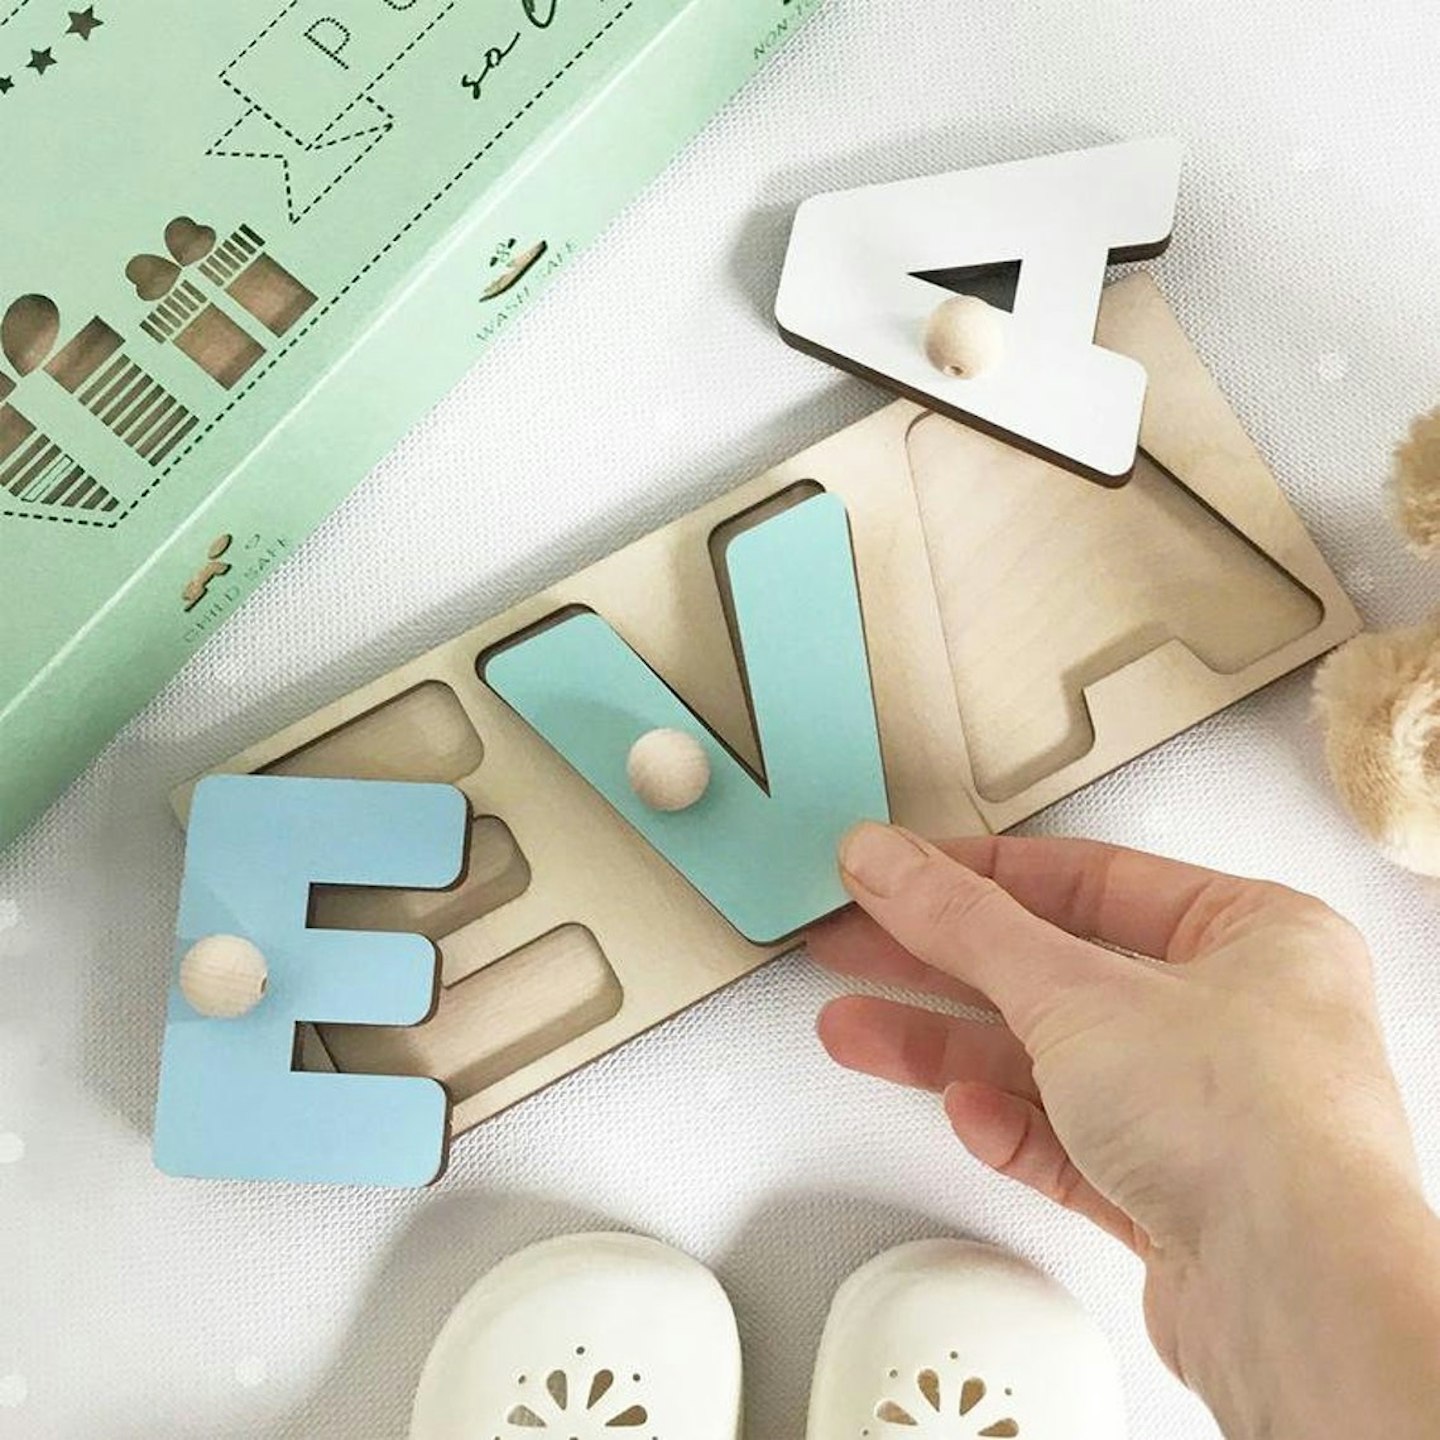 Etsy, Colorful 3D Wooden Name Puzzles, From £6.20